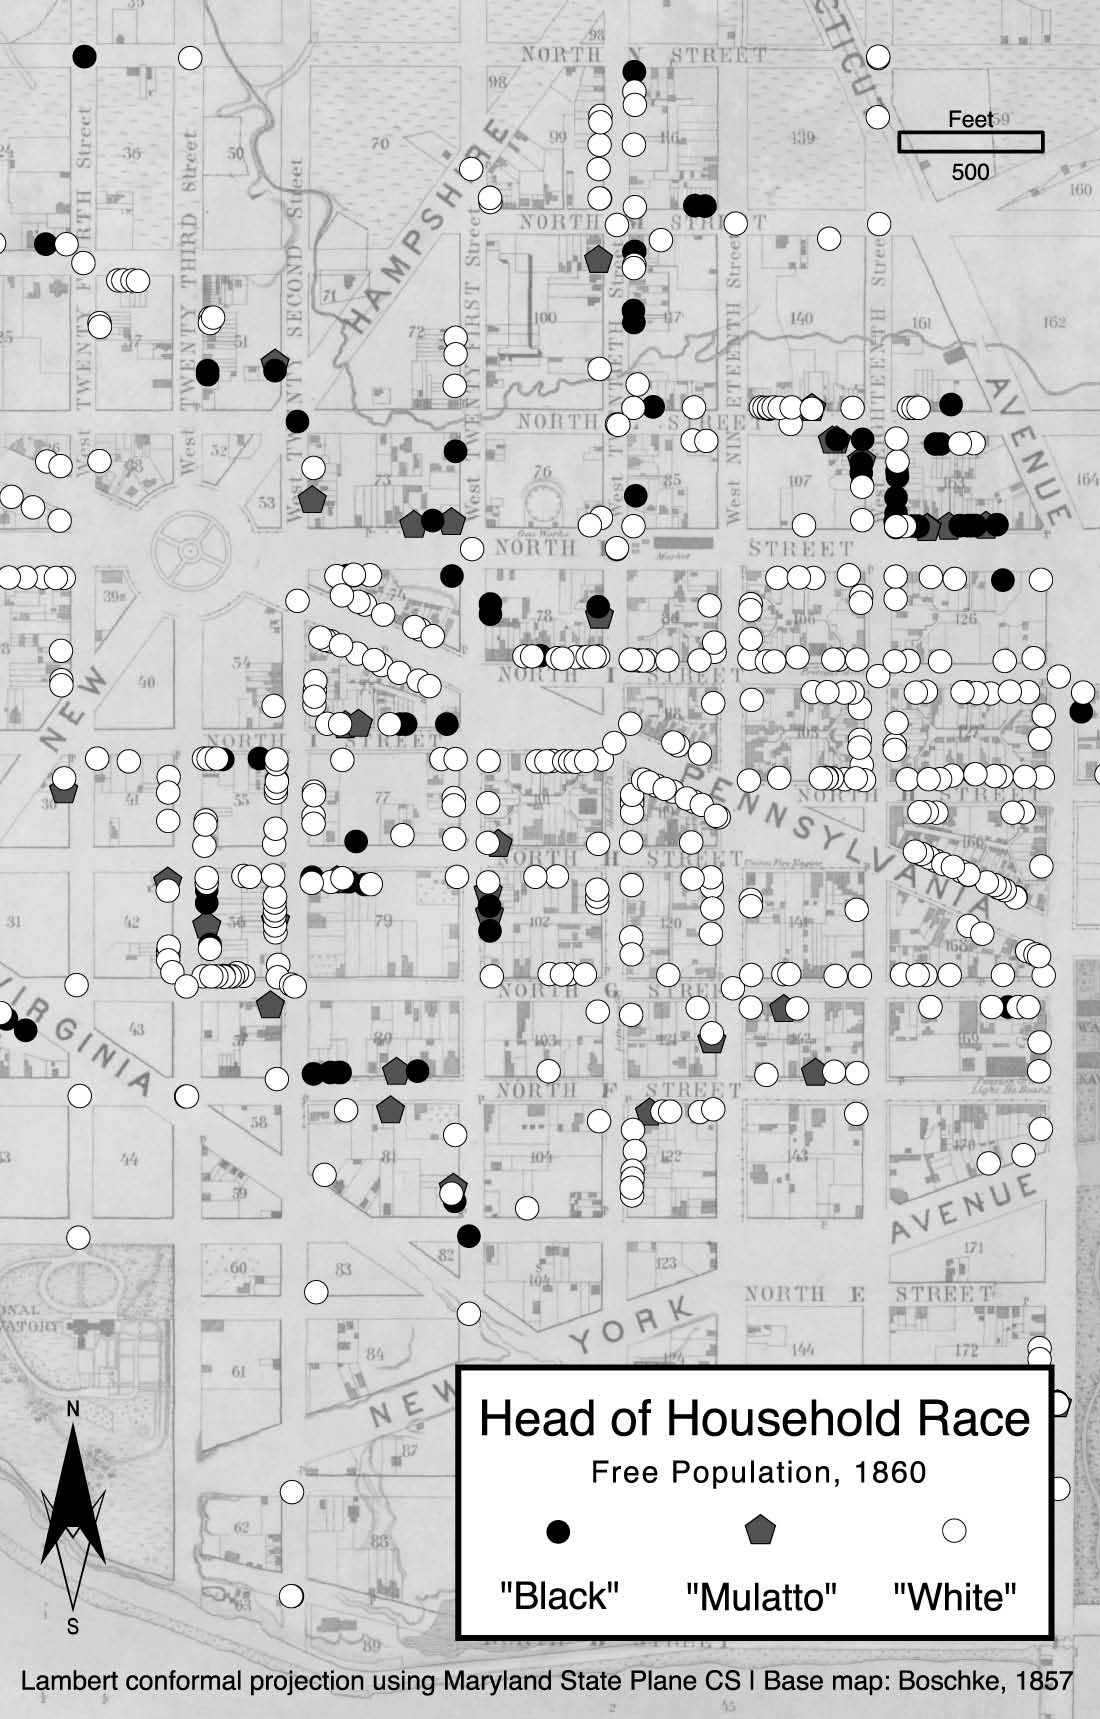 Image of a map showing personal estate values in Washington, DC's First Ward